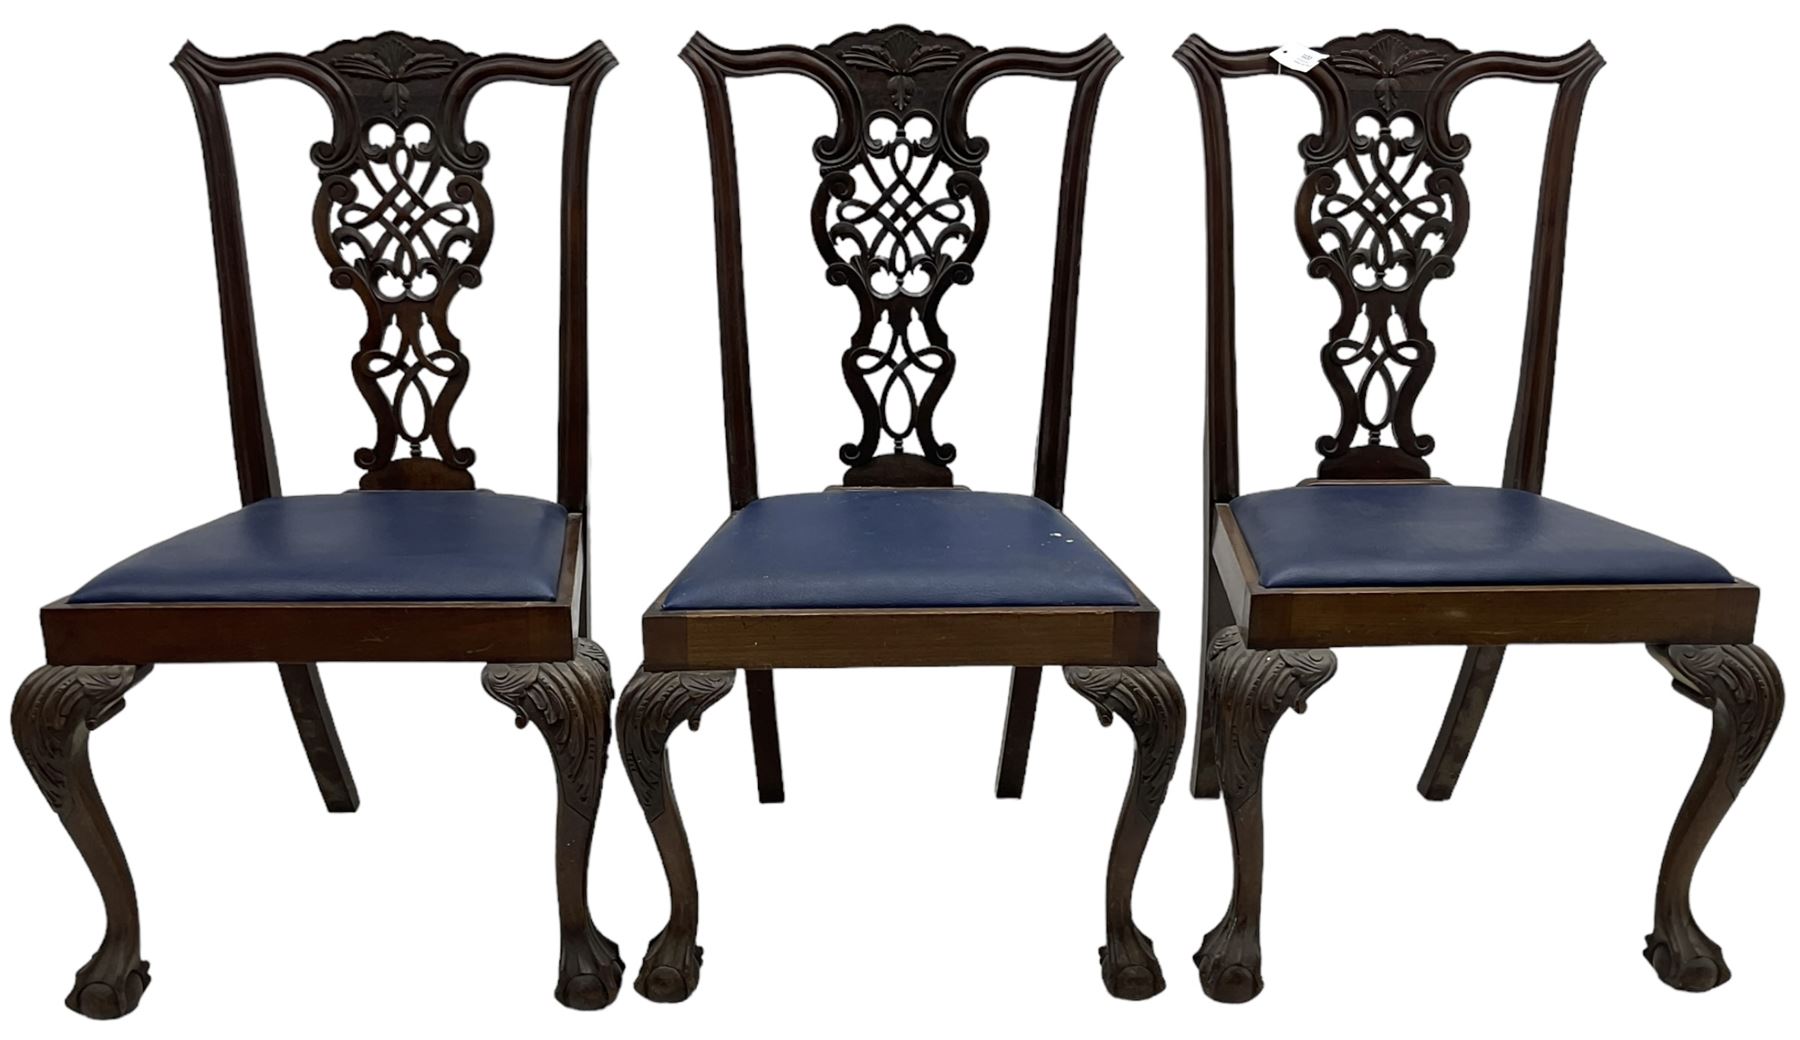 Set of six (5+1) Chippendale design mahogany dining chairs - Image 8 of 8